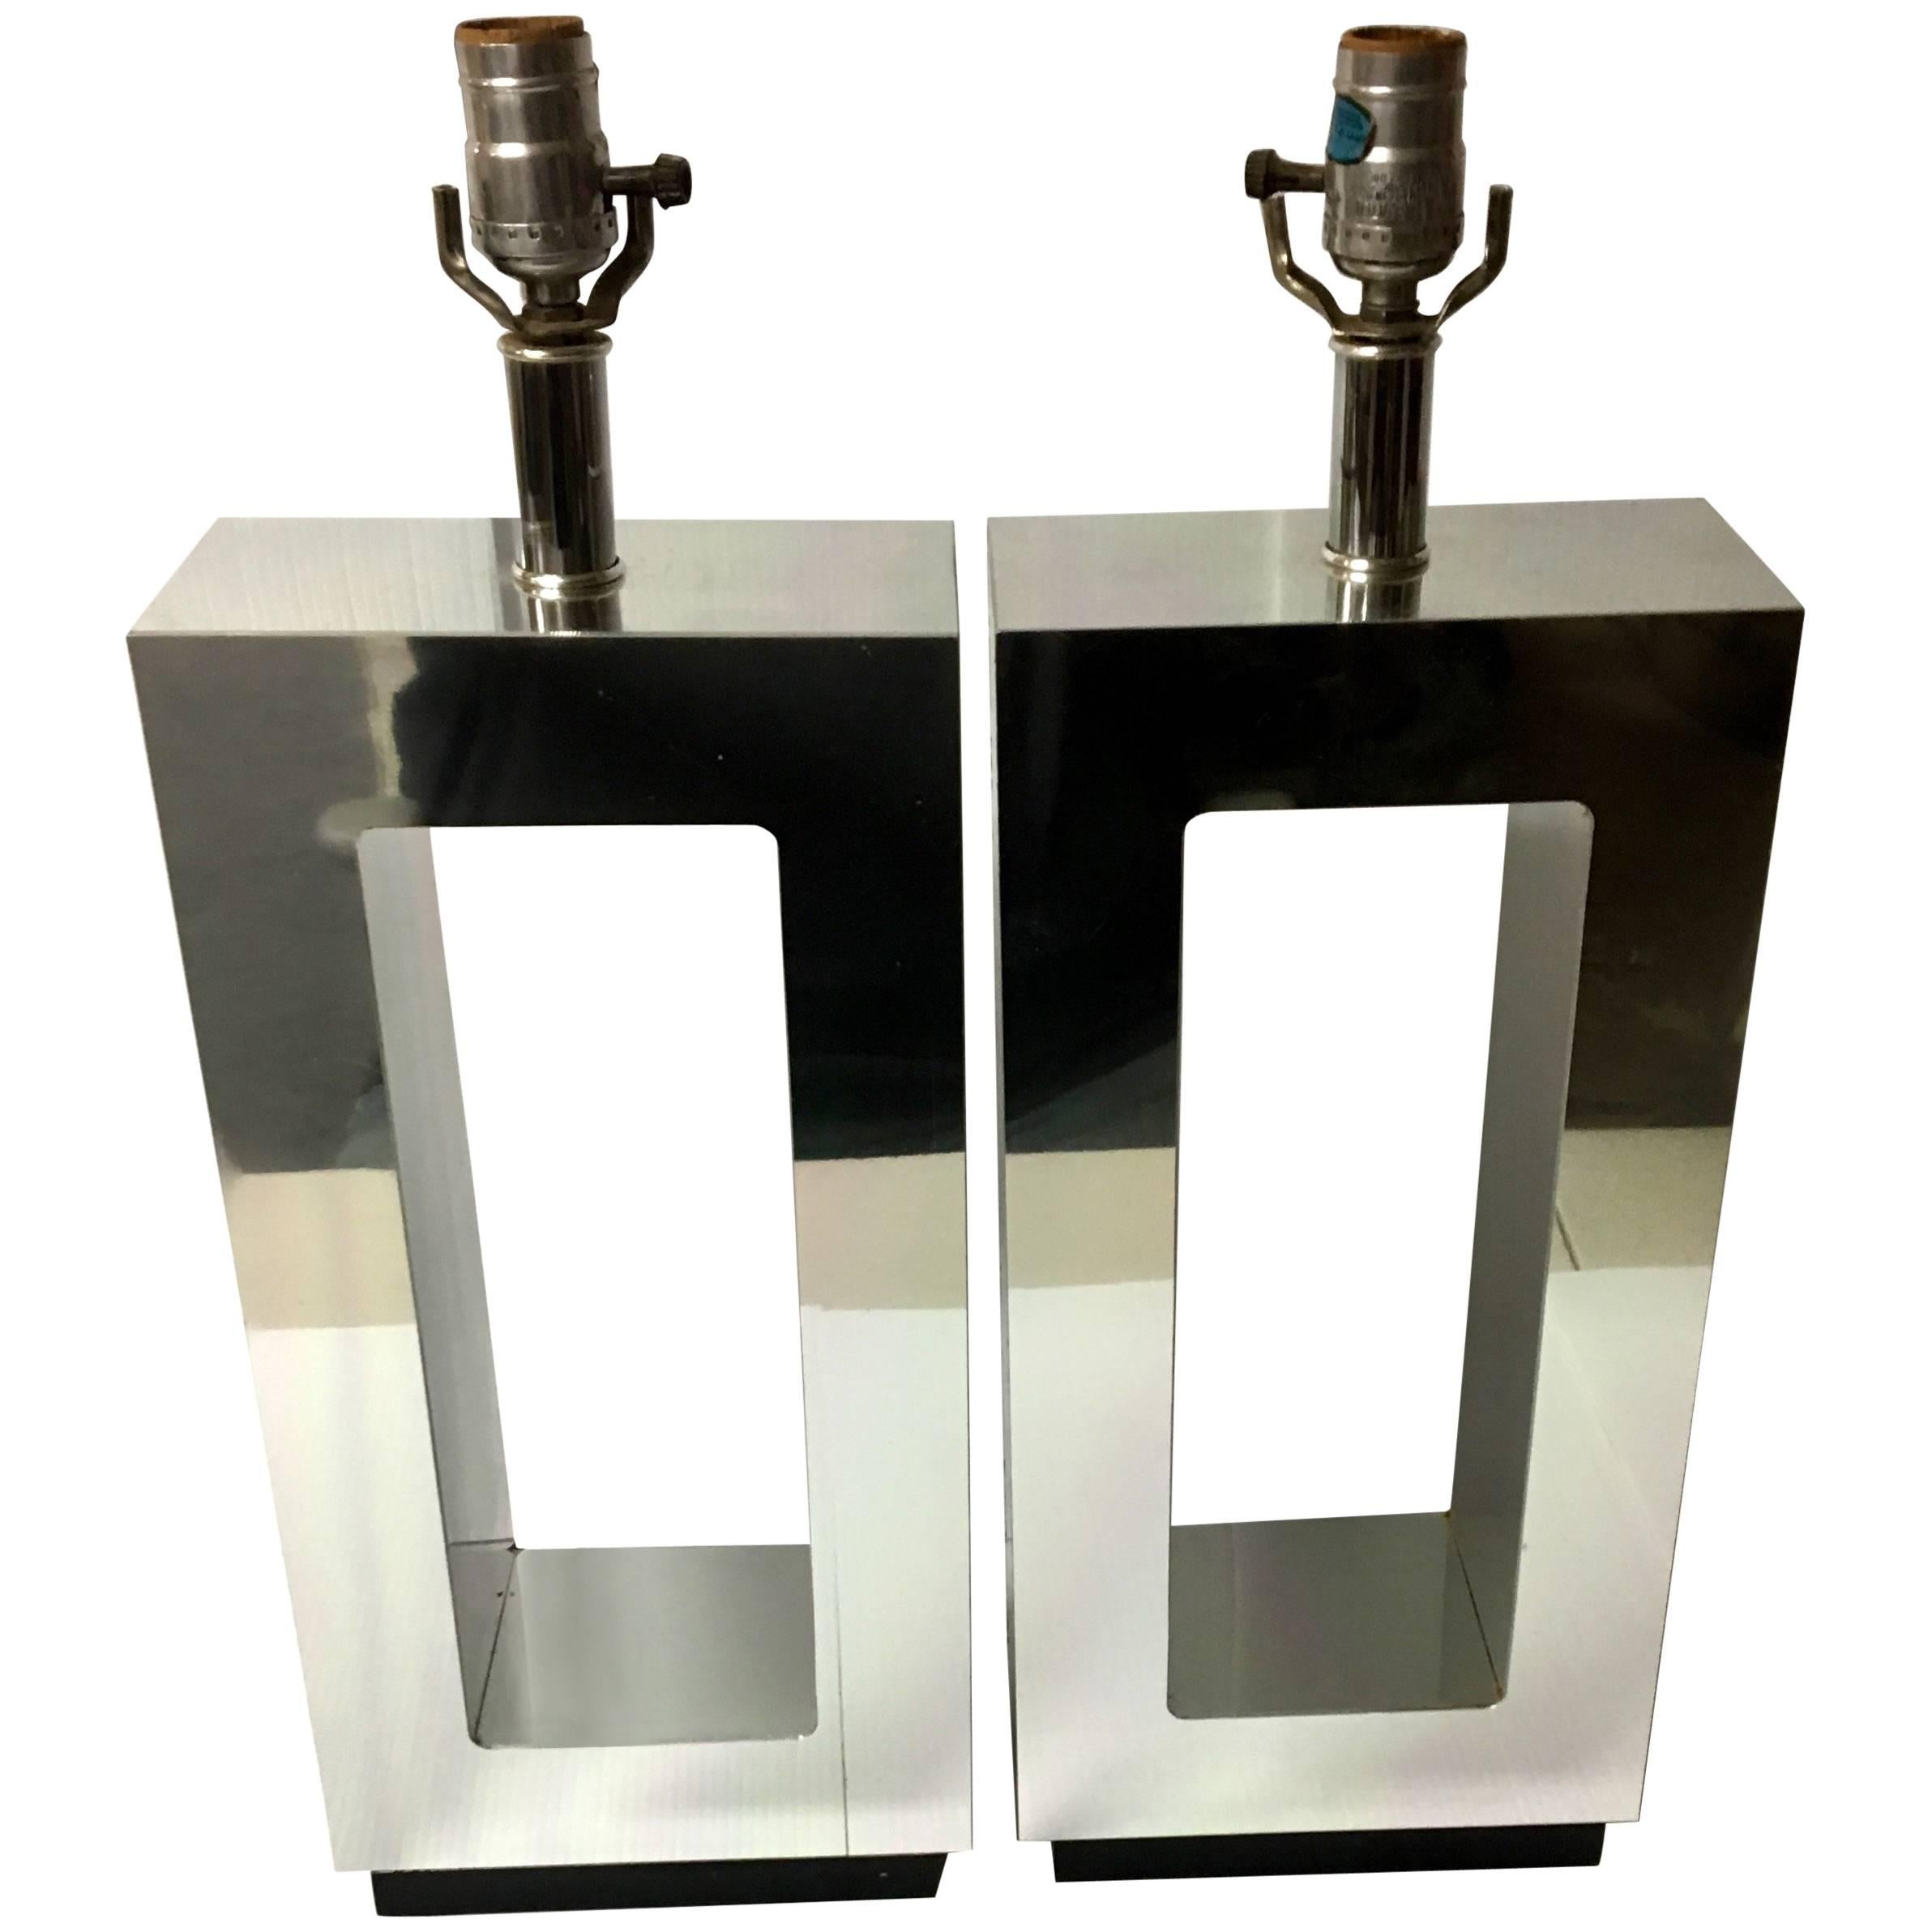 Pair of Mirrored Geometric Table Lamps in the Style of Milo Baughman, 1970s For Sale